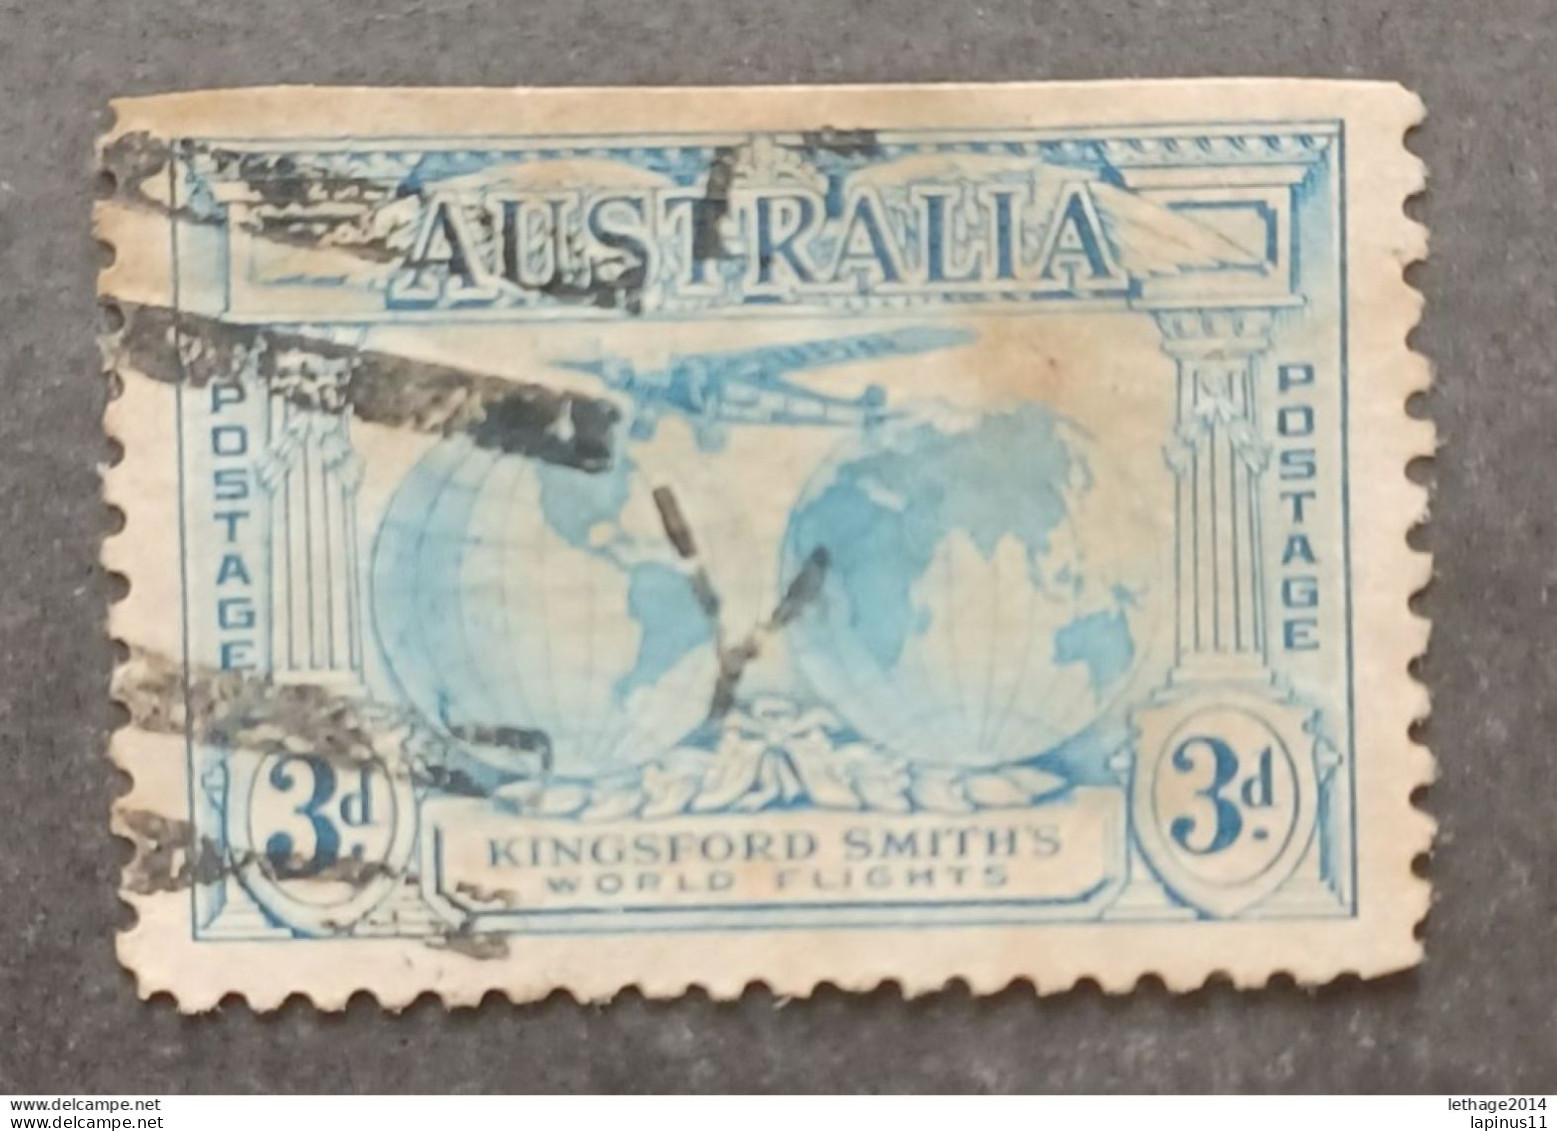 AUSTRALIA 1931 SOUTHERN CROSS OVER OF THE EMISPHERES SCOTT N 112 VARIETY SUPERIOR IMPERFORATE - Usados